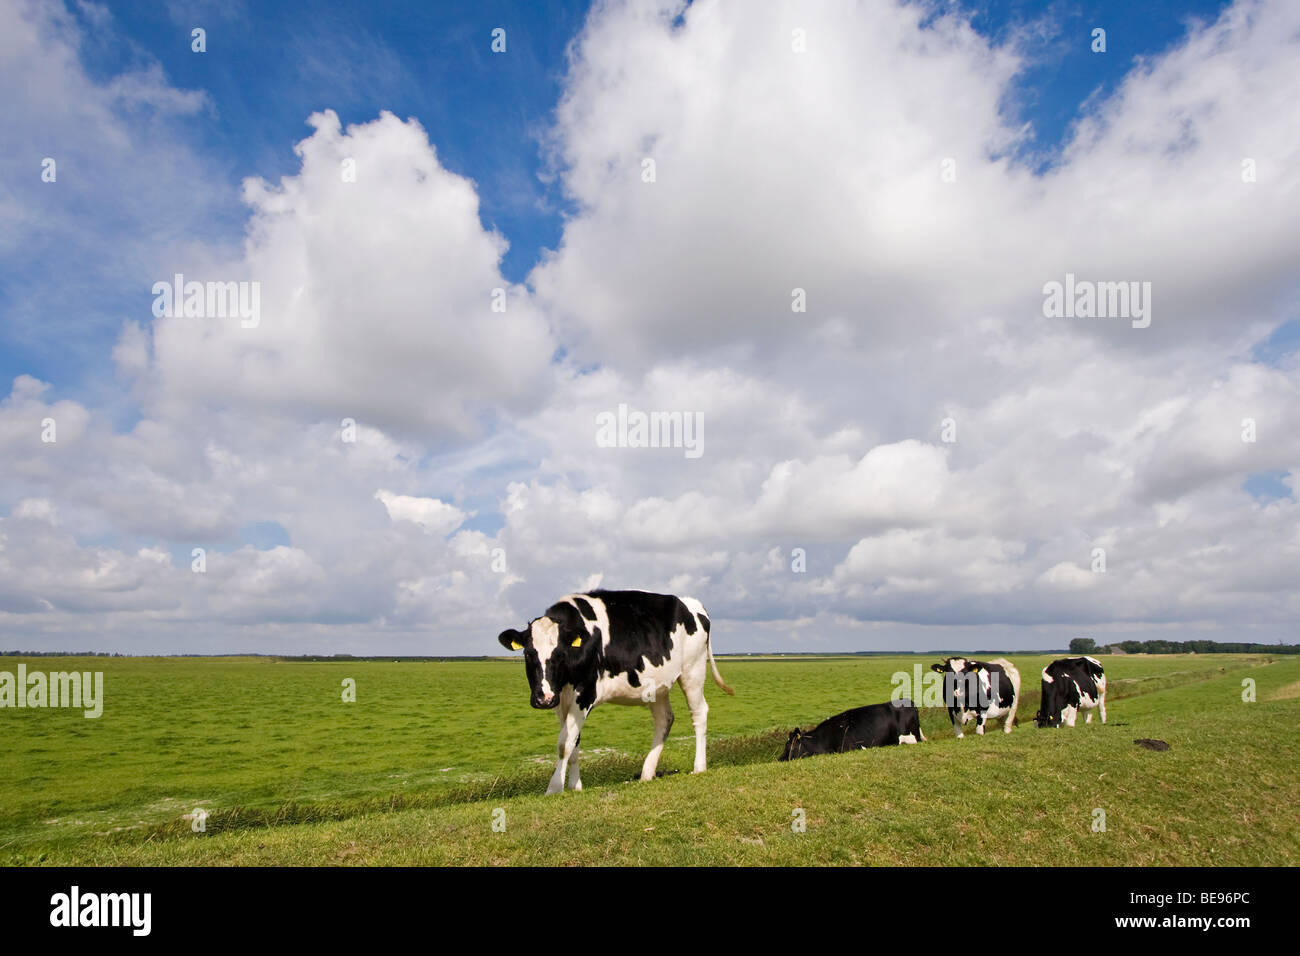 Cows on a dike in National Park Lauwersmeer; koeien op de dijk in Nationaal Park Lauwersmeer Stock Photo